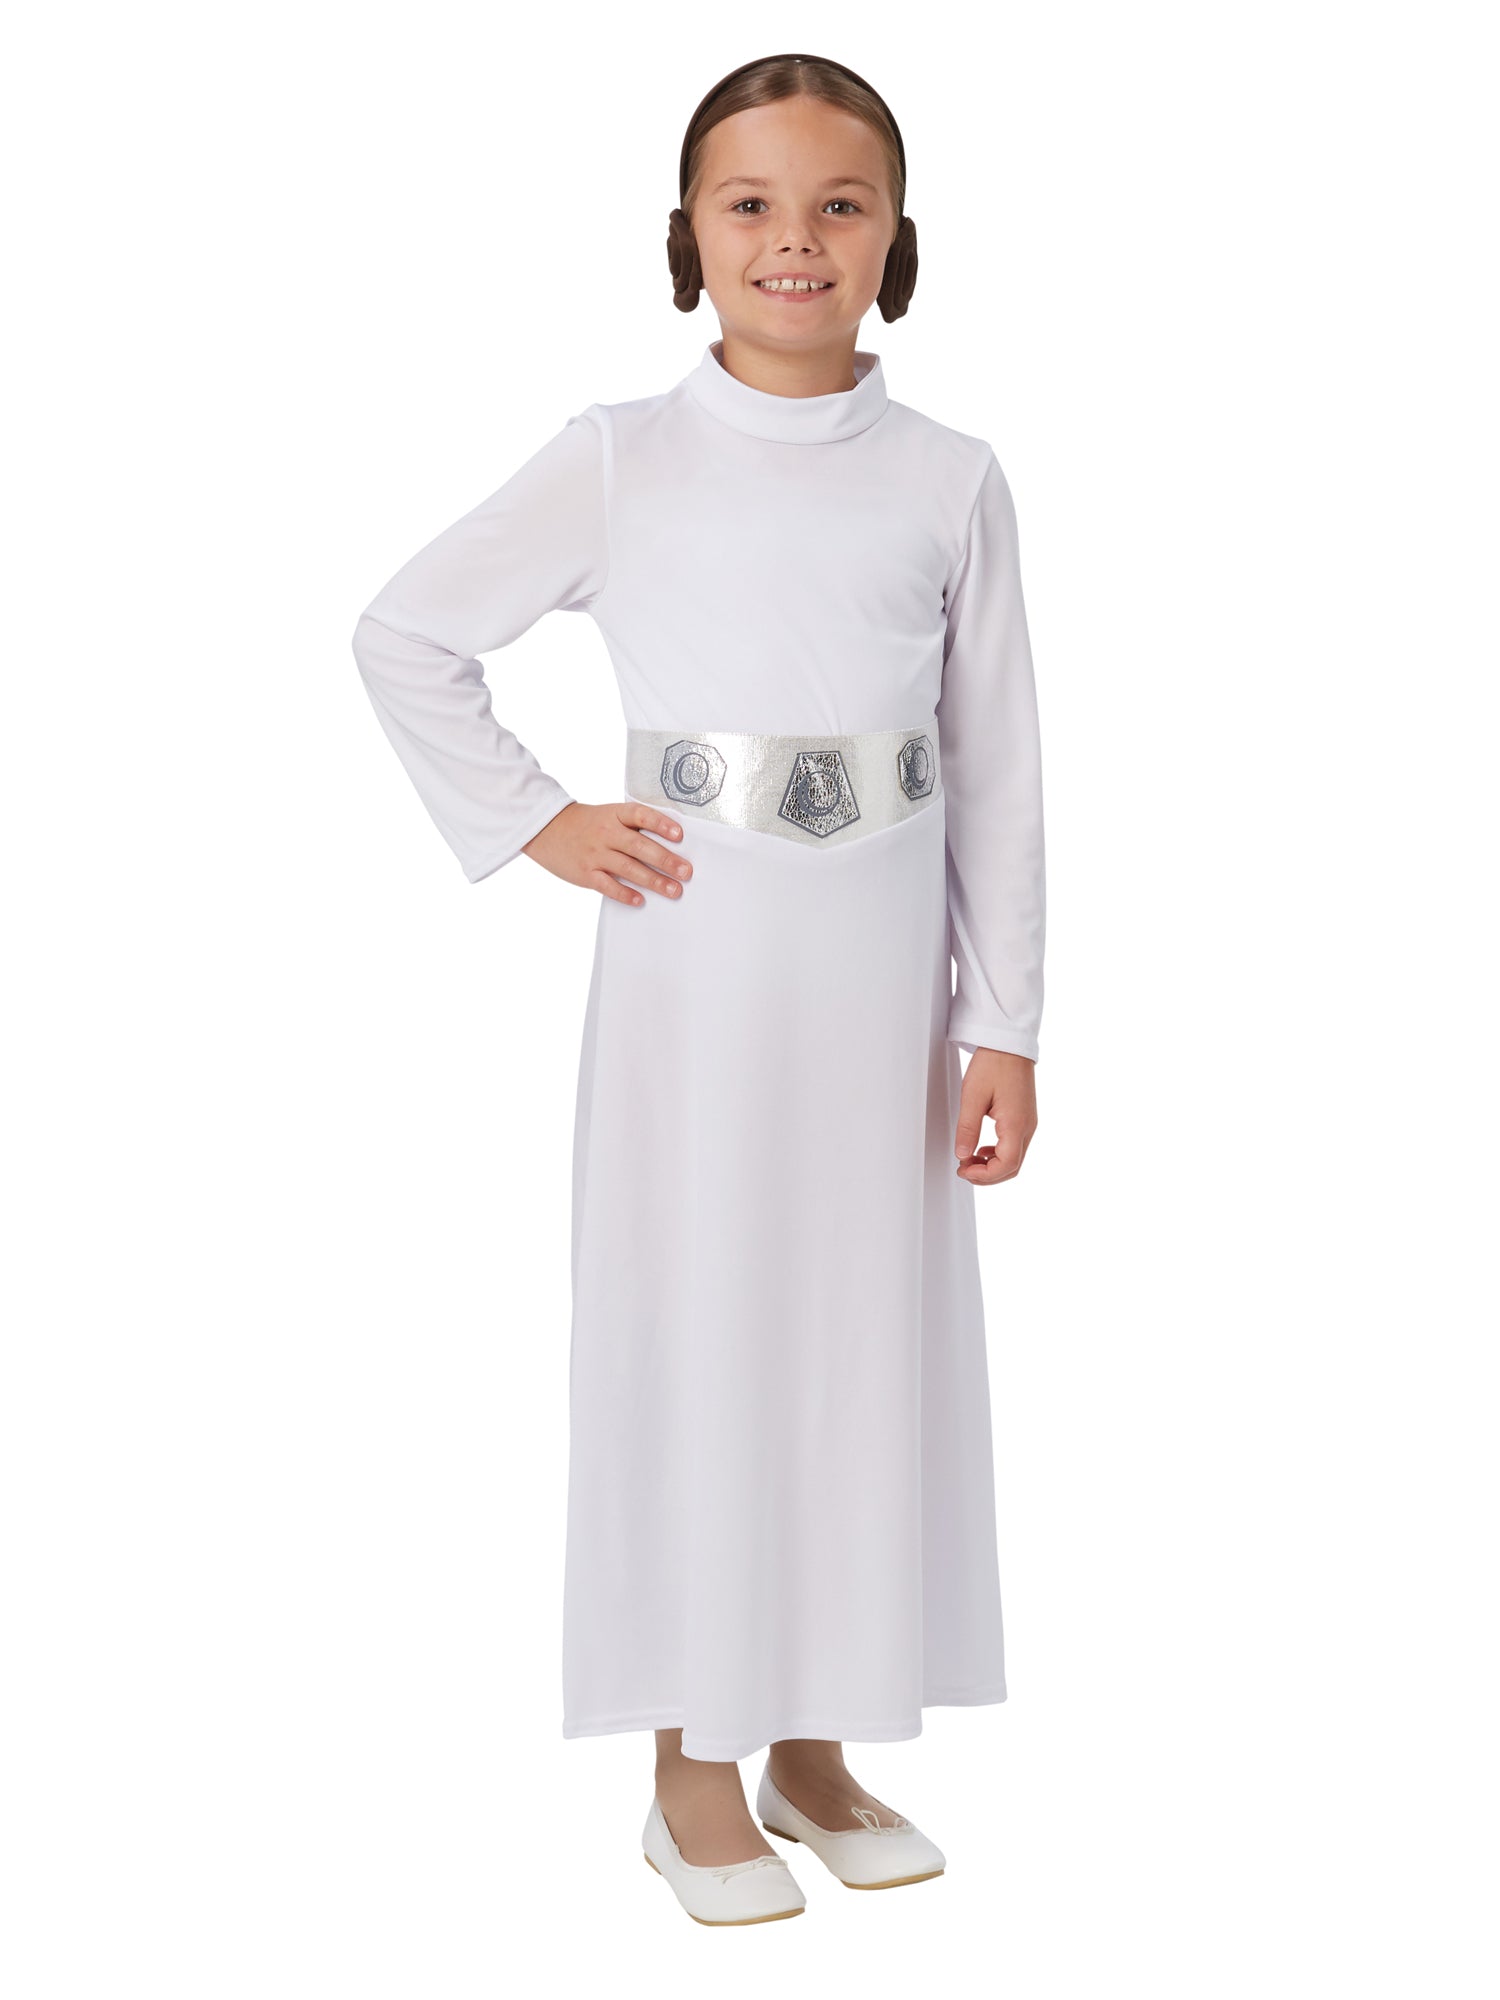 Princess Leia, A New Hope, A New Hope, A New Hope, Multi, Star Wars, Kids Costumes, Extra Large, Front